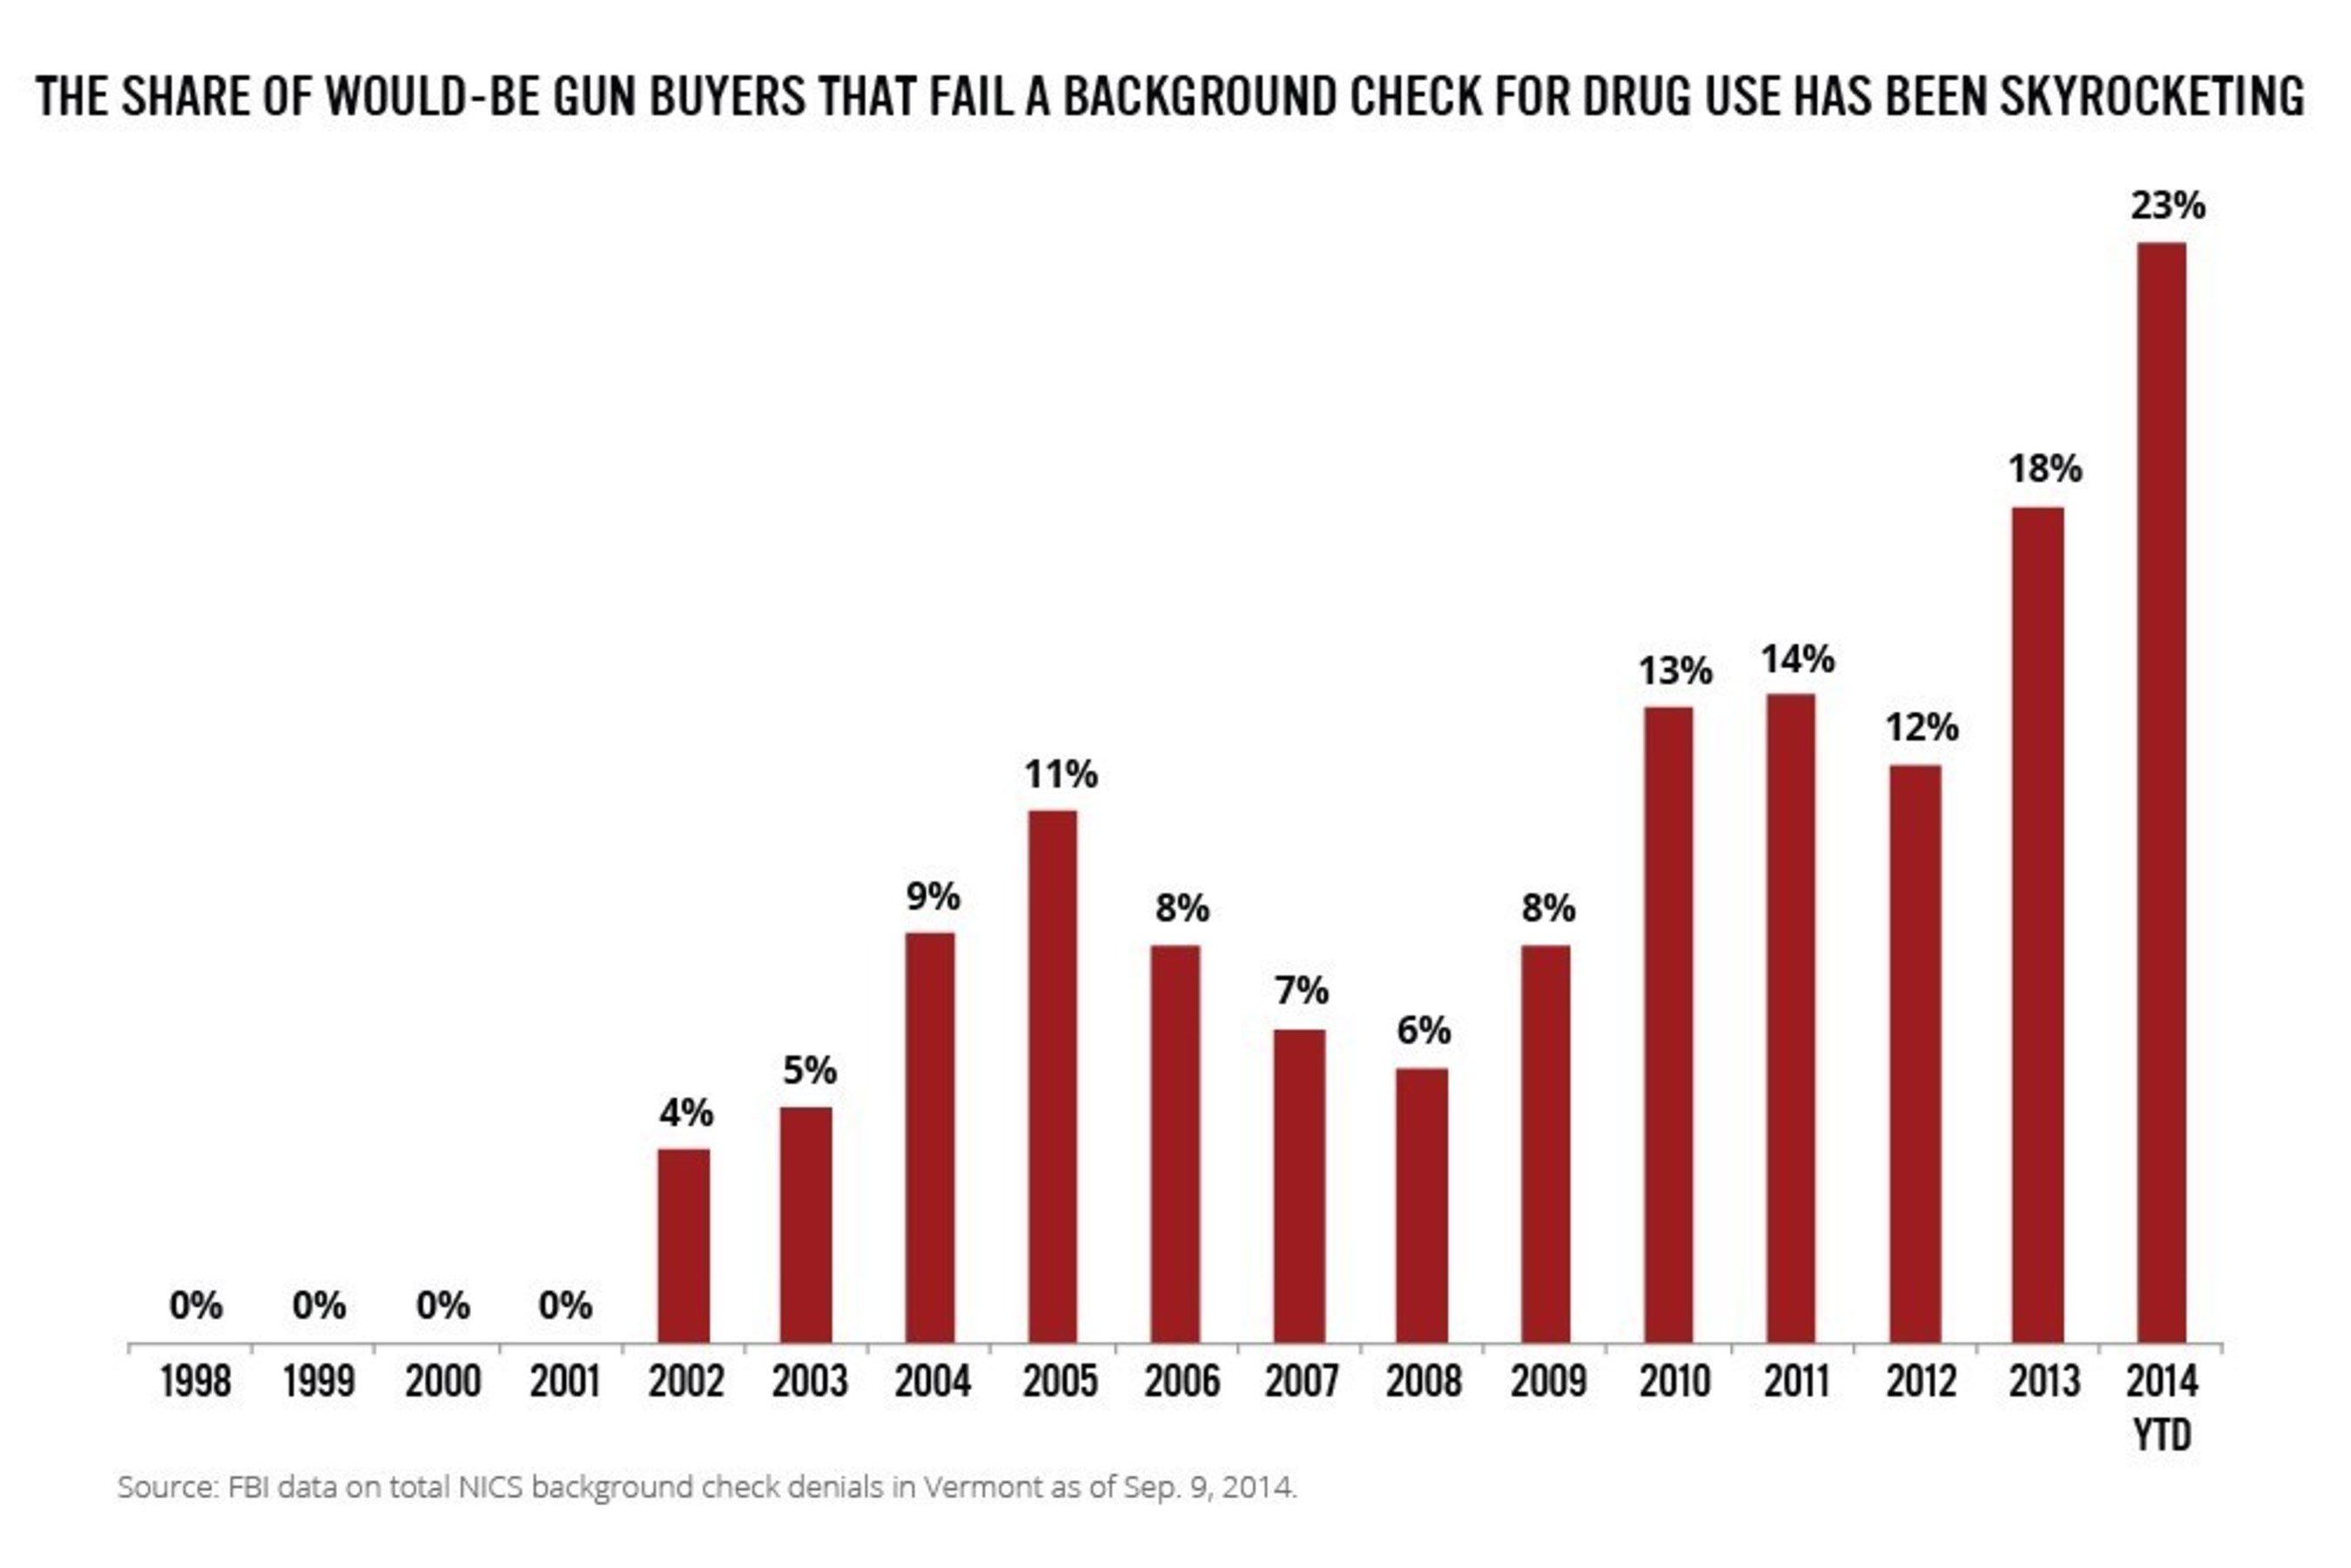 The share of would-be gun buyers that fail a background check for drug use has been skyrocketing